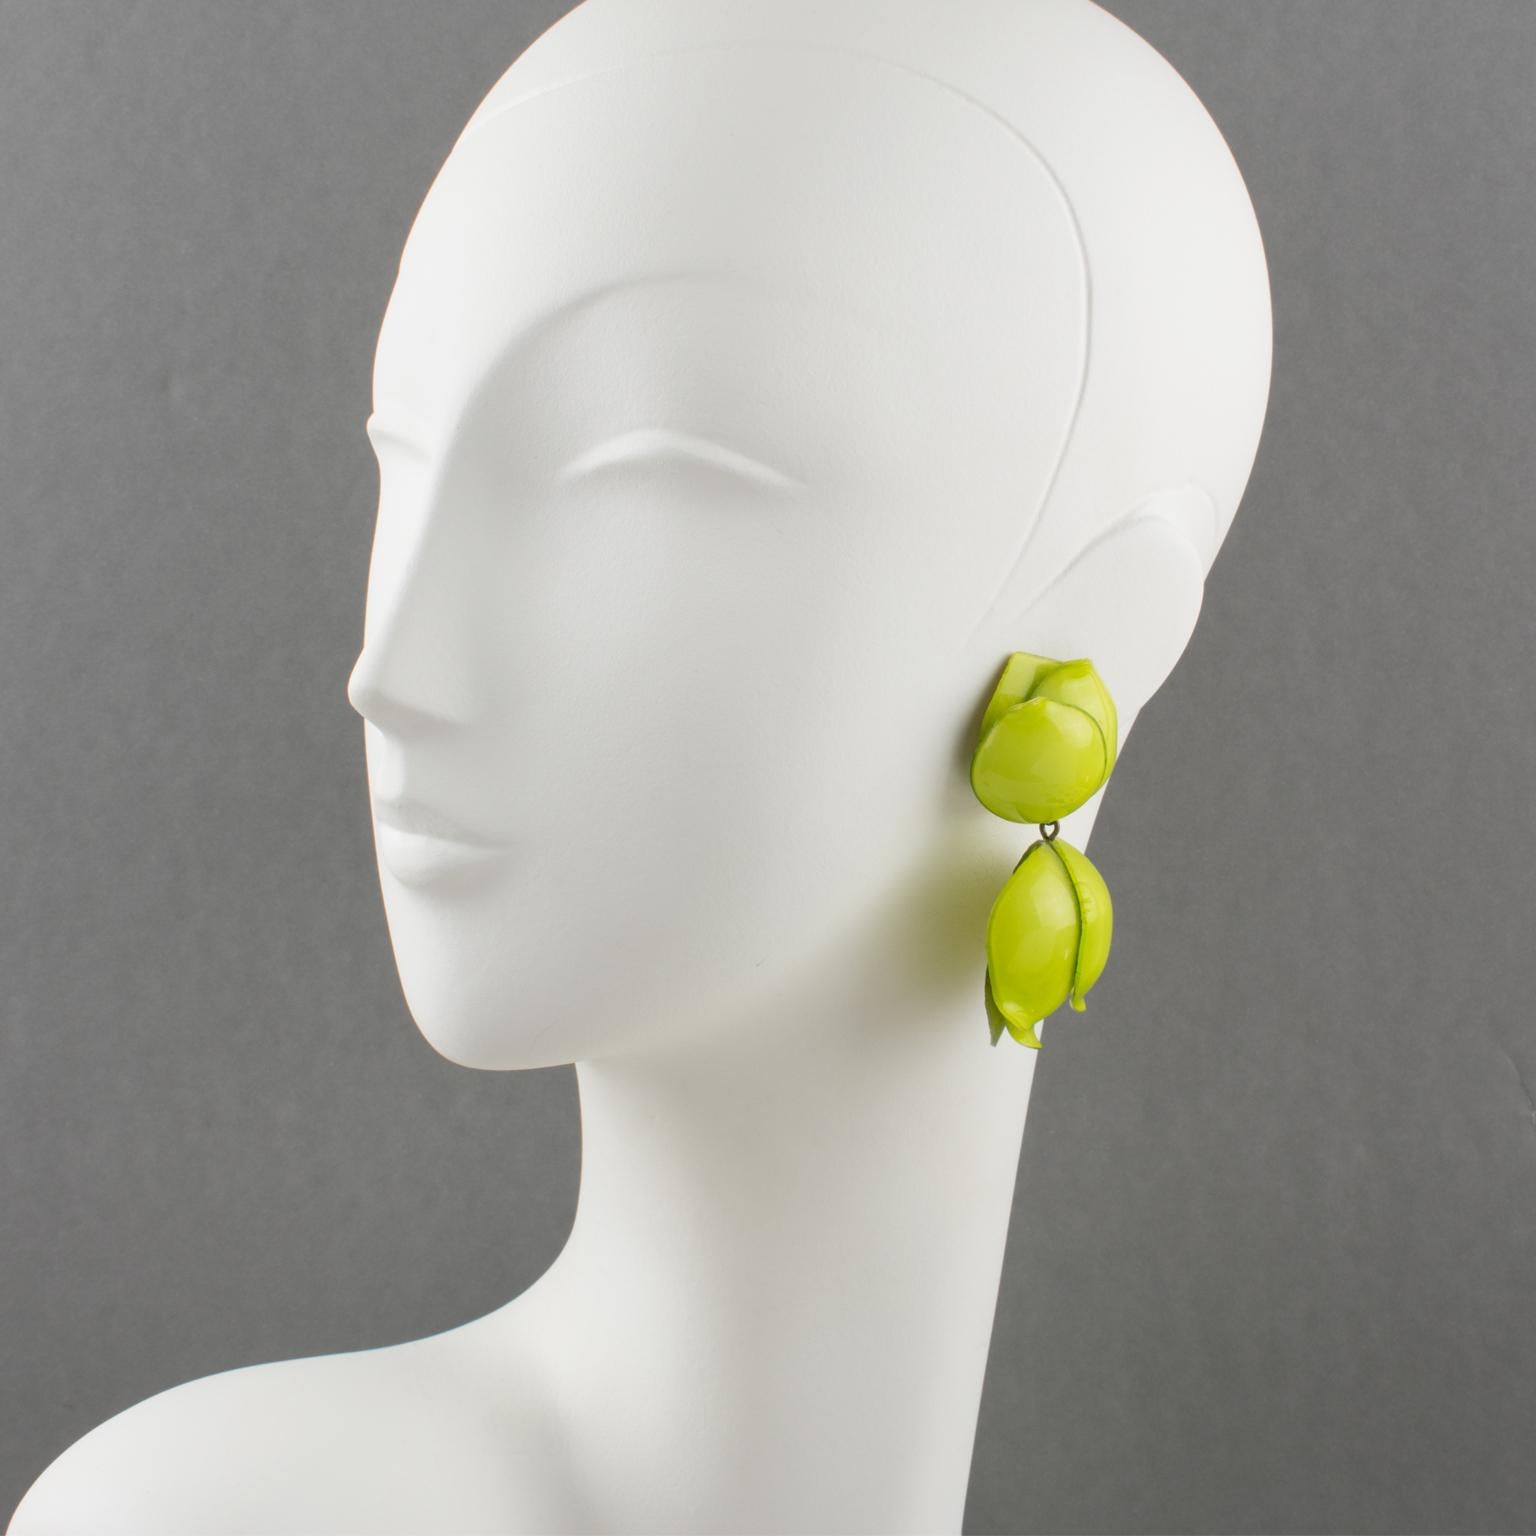 So lovely French designer Francoise Montague, Paris resin clip-on earrings, designed by Cilea Paris. They feature a dangling floral shape, all carved and raised flowers in apple green color. As usual, no visible maker's mark since none of Montague's